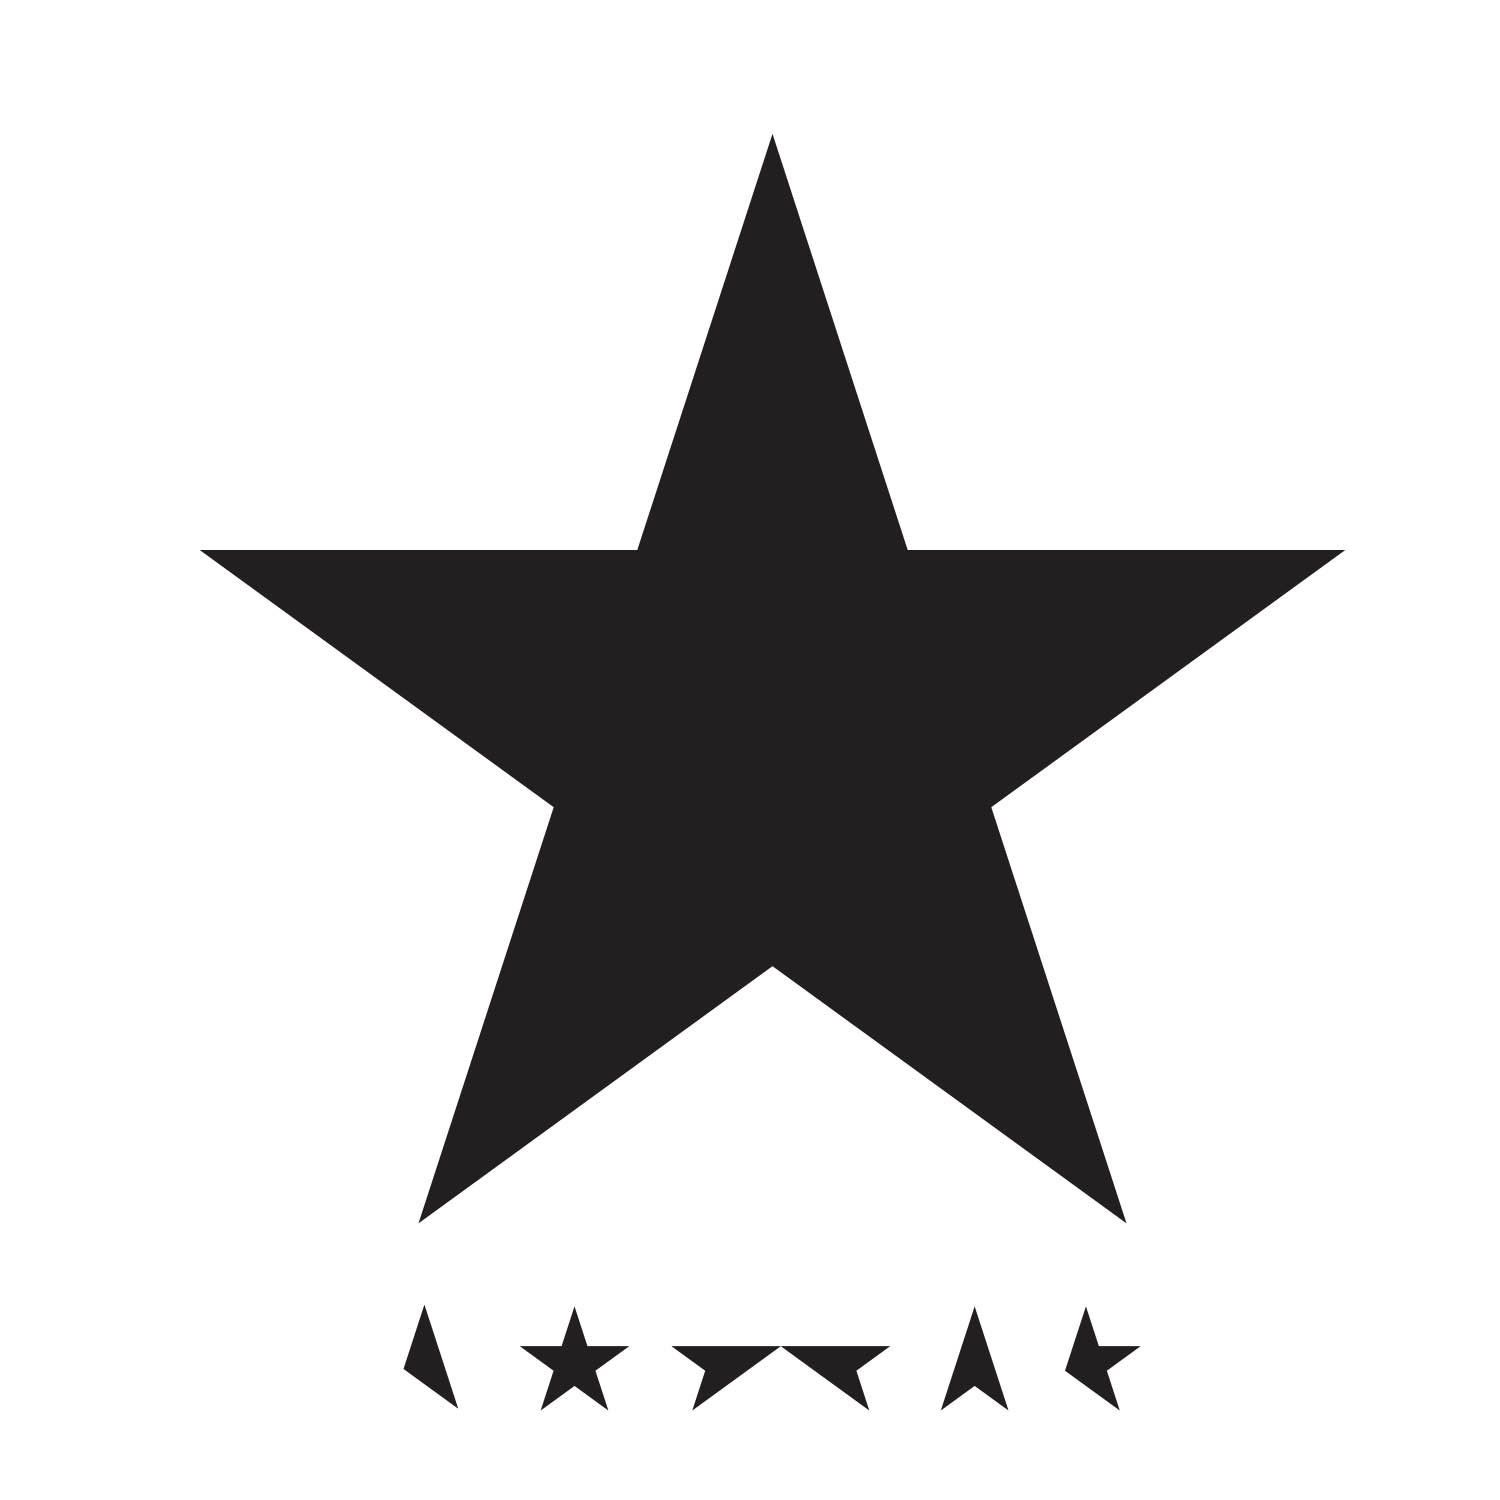 Review of 'Blackstar', the new full-length album by David Bowie